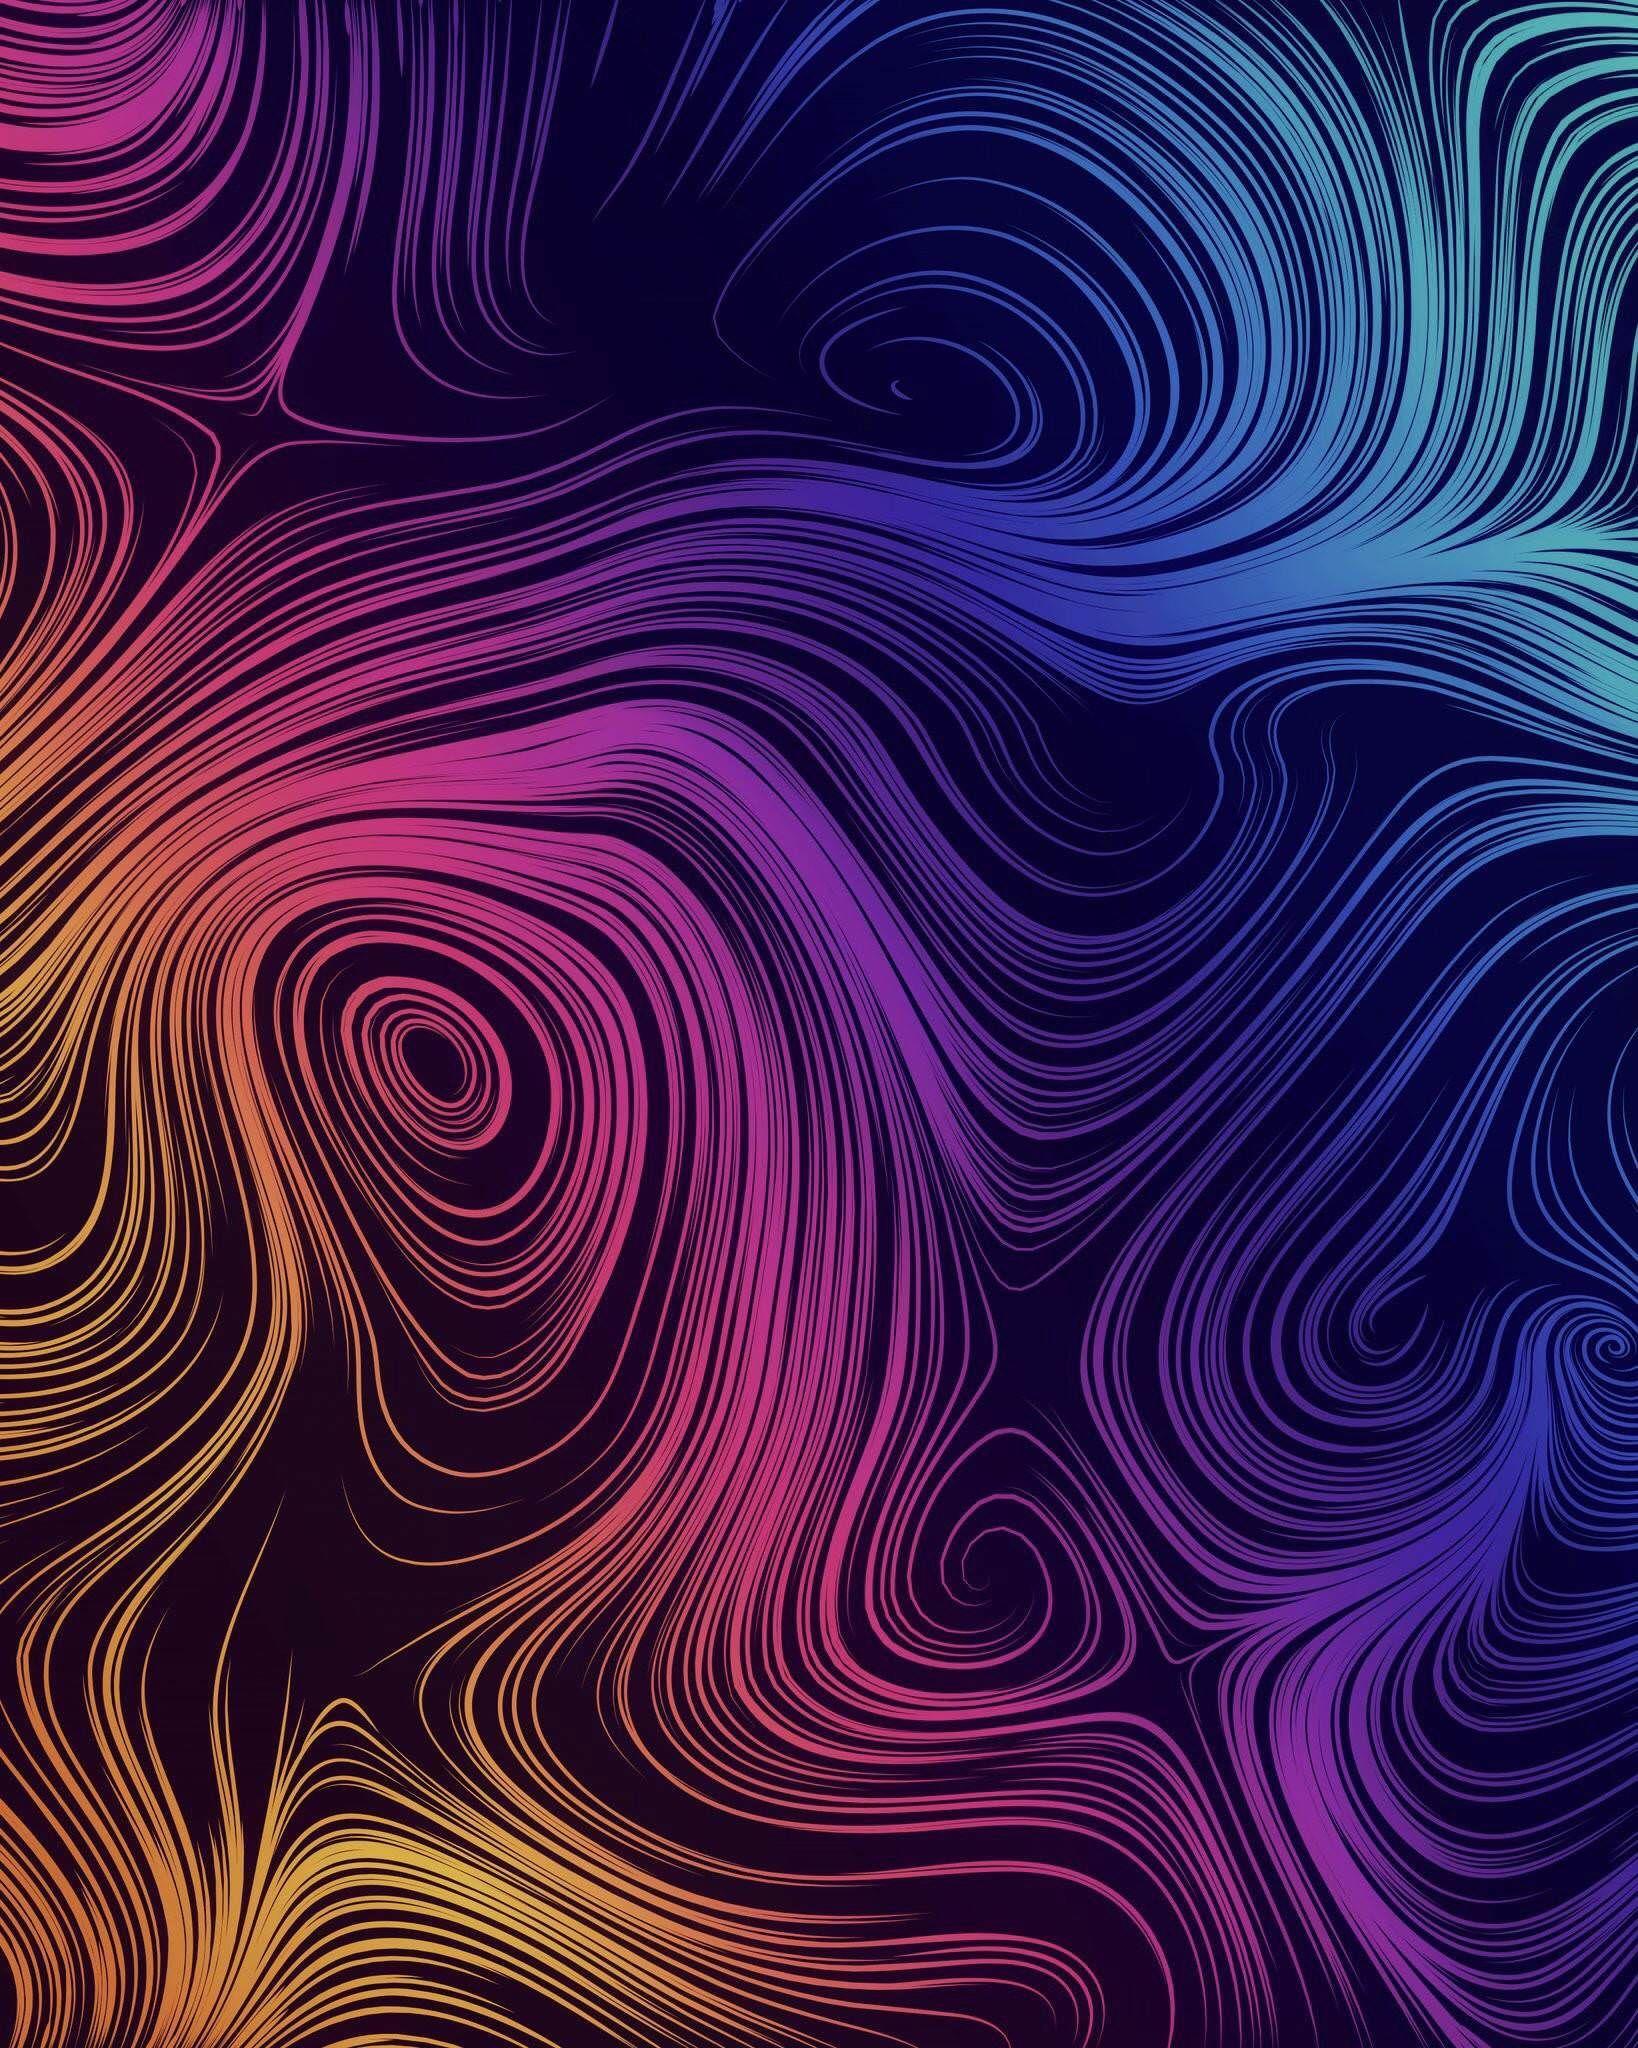 Is this the Galaxy S9 wallpaper from MKBHD? Download at